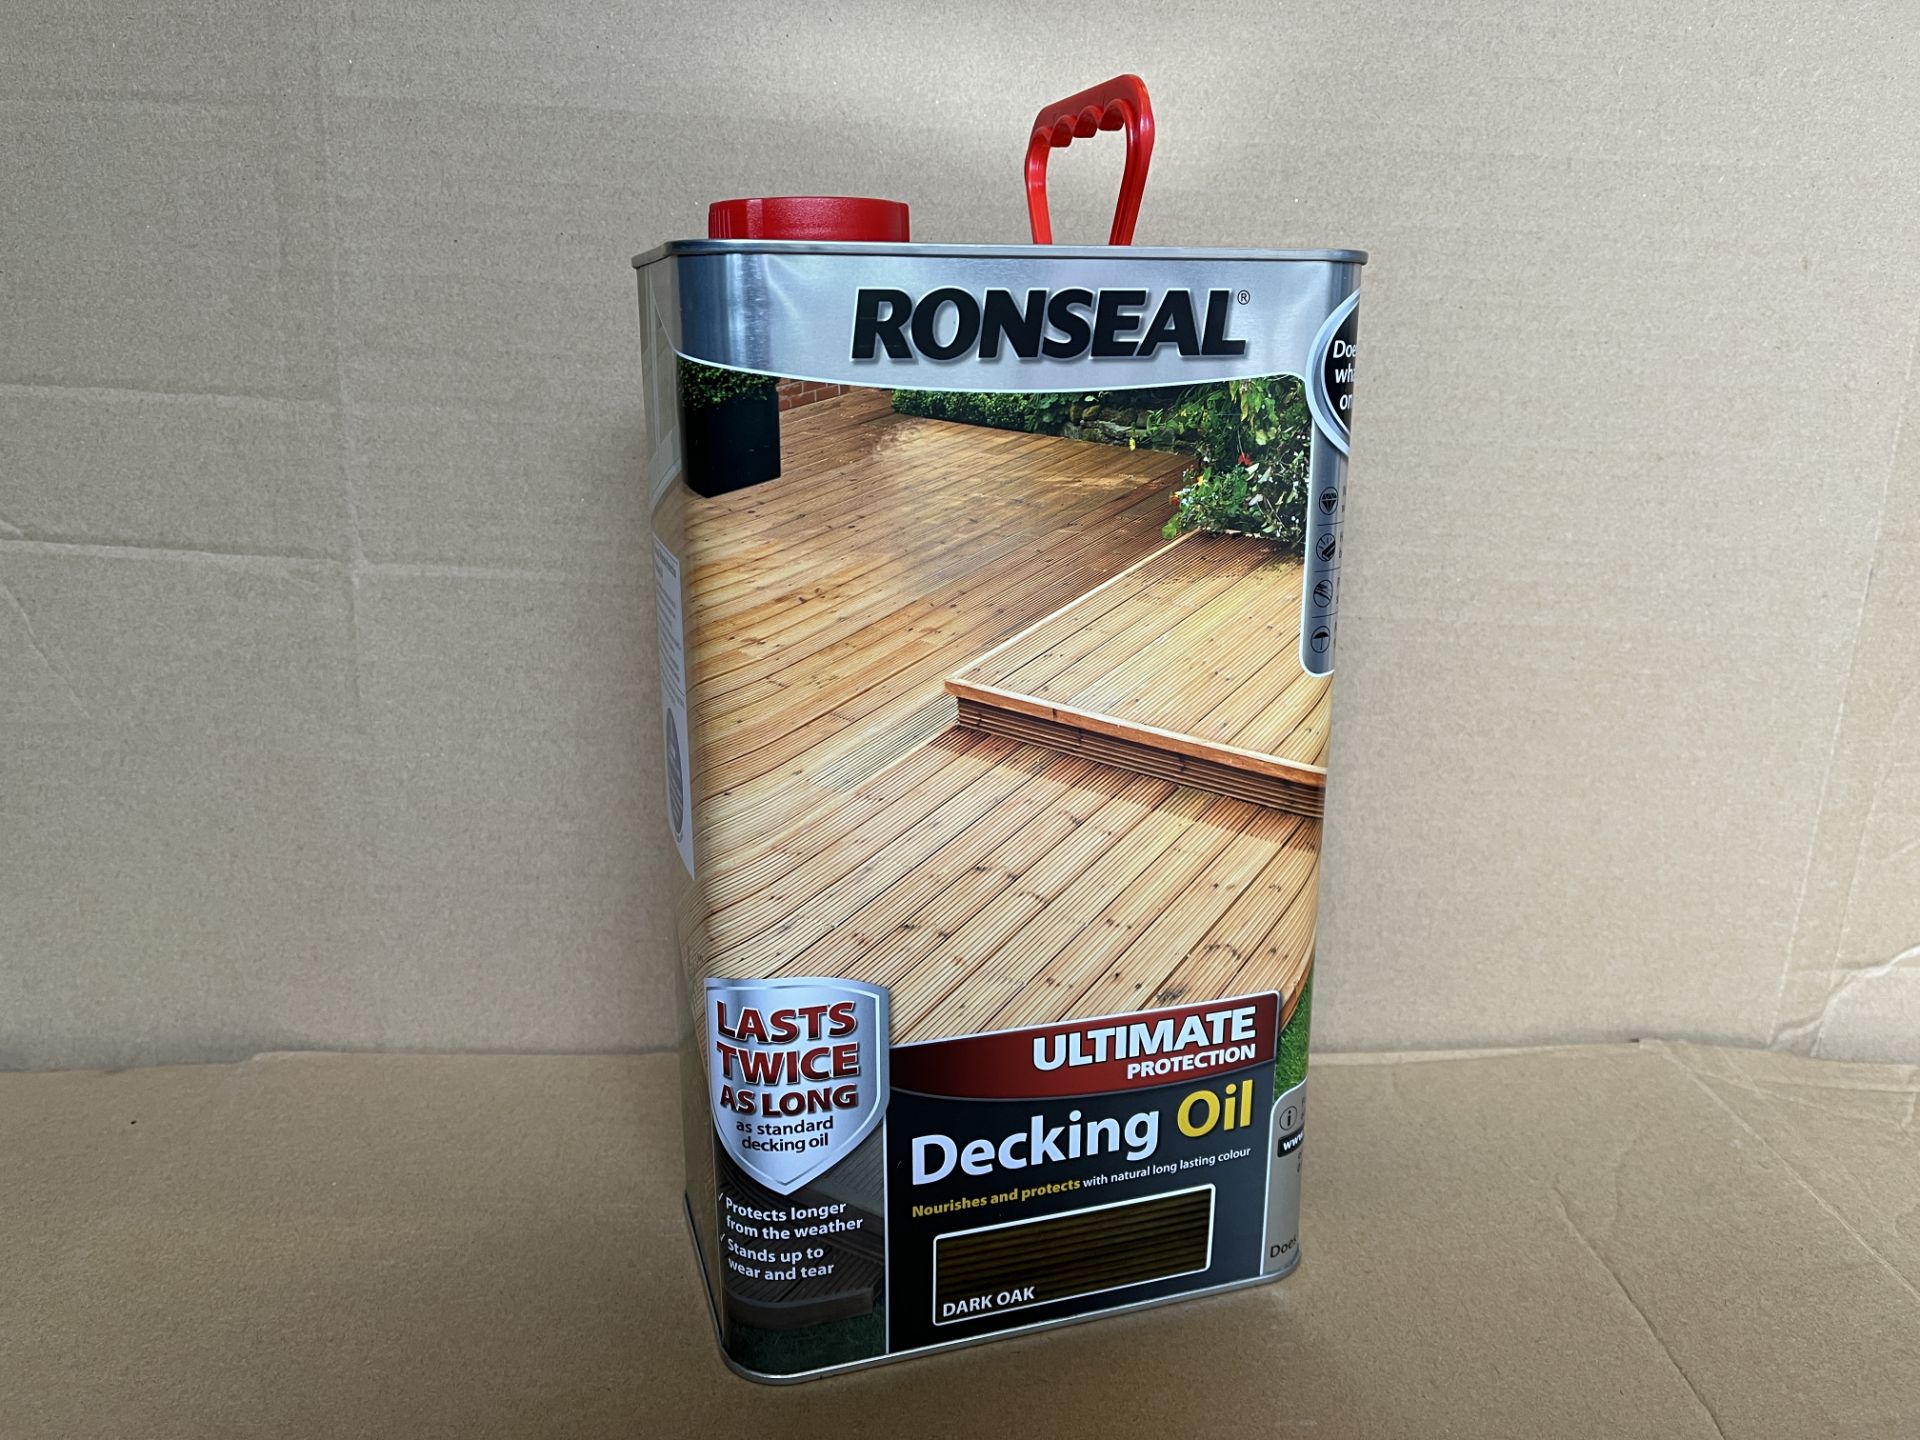 4 X BRAND NEW RONSEAL ULTIMATE PROTECTION DECKING OIL DARK OAK 5 LITRE RRP £55 EACH S1-7